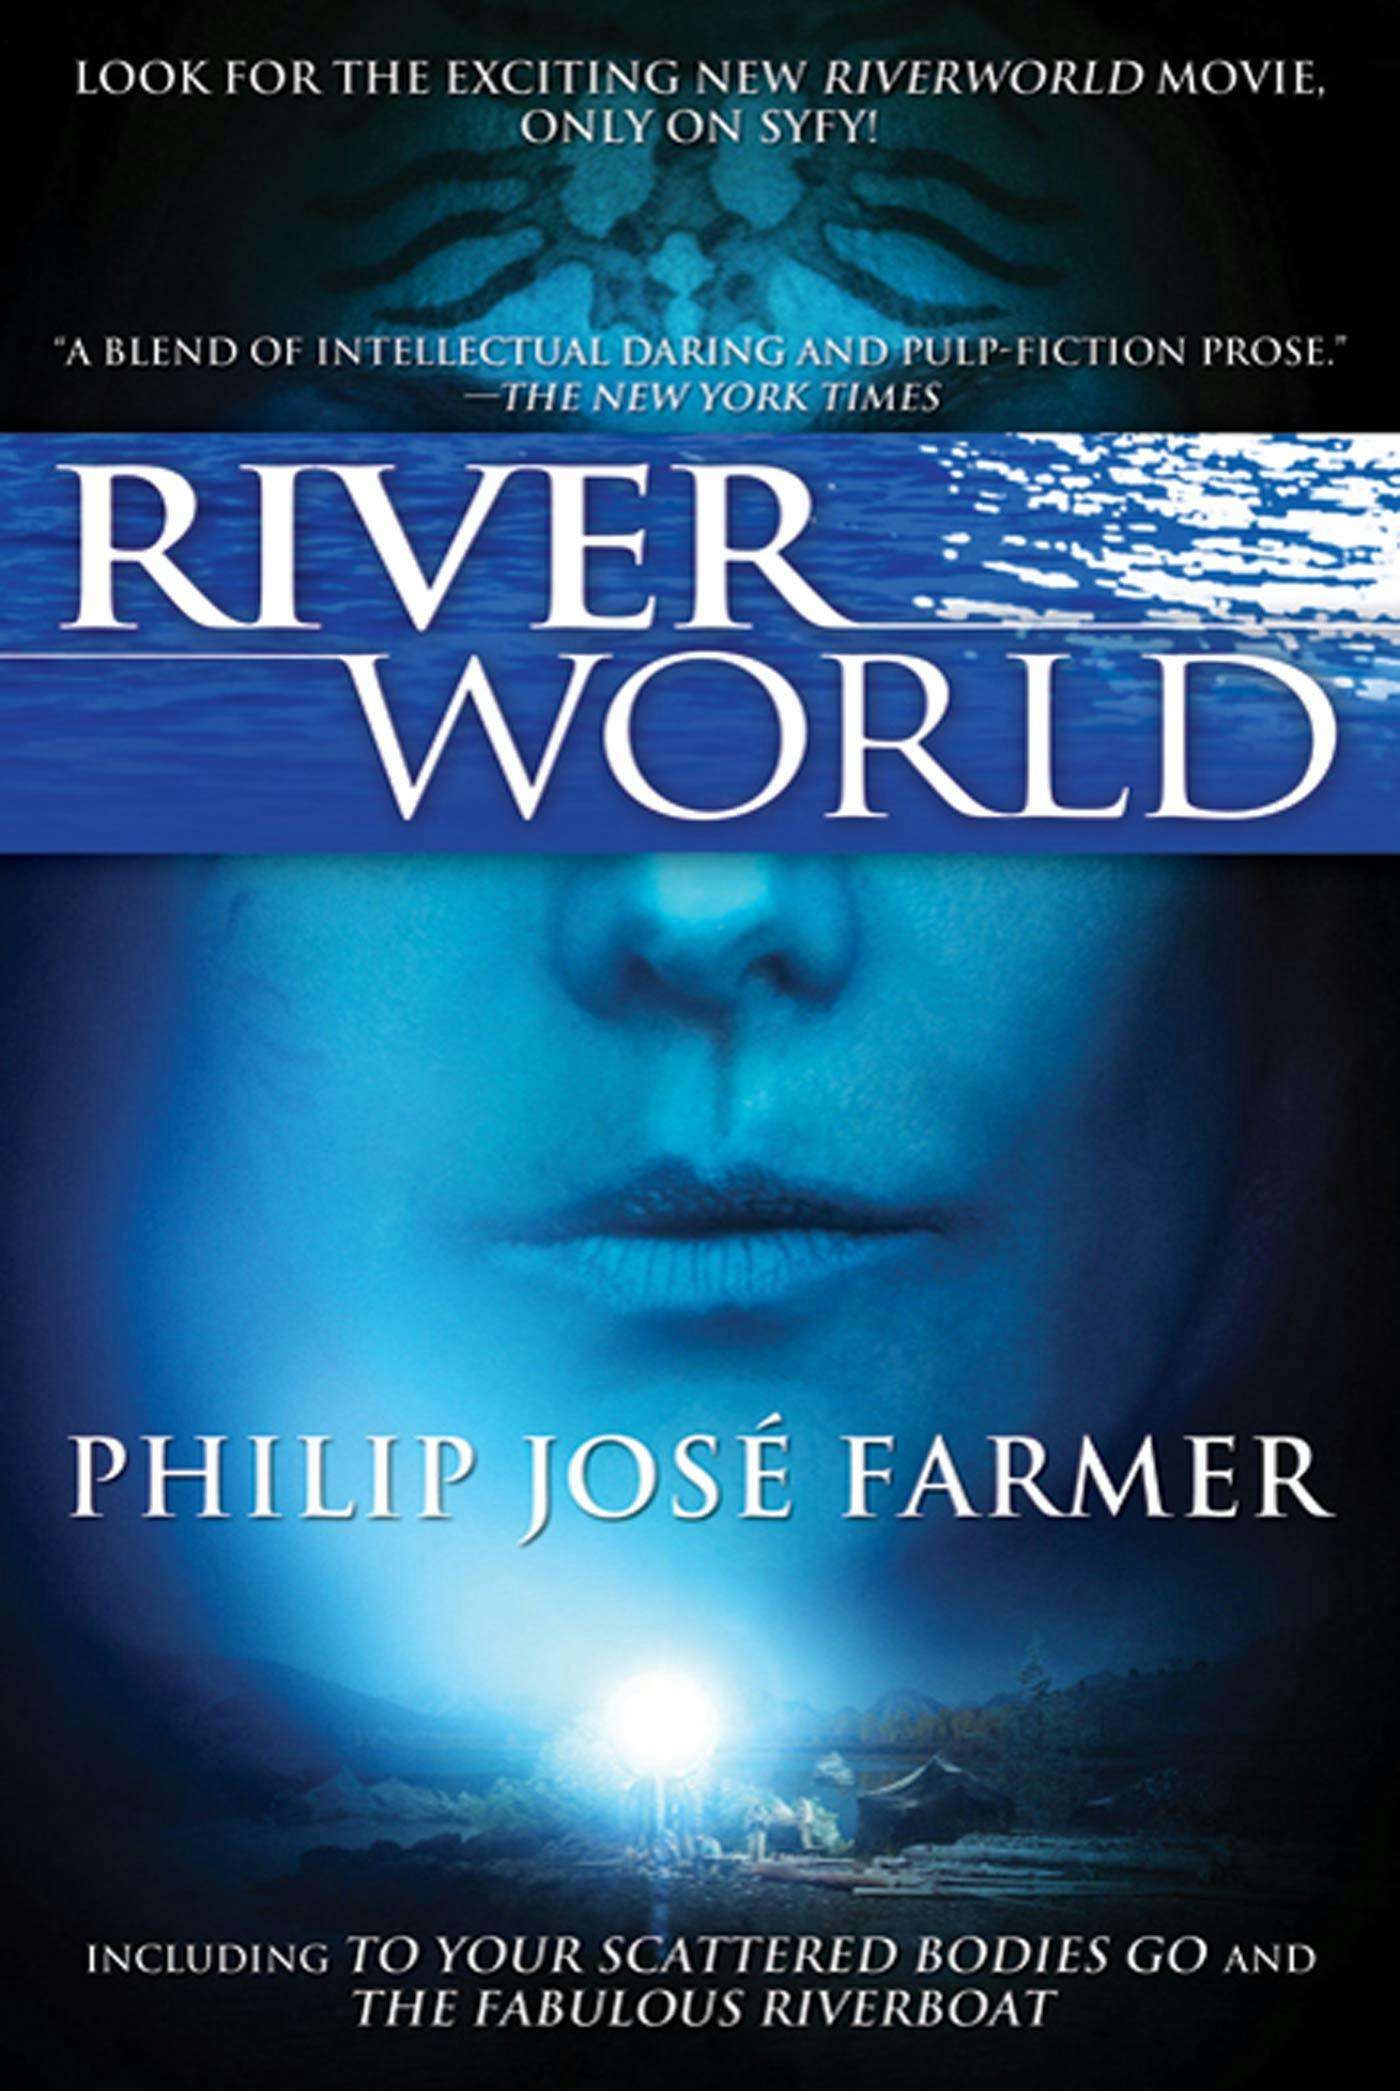 Cover for the book titled as: Riverworld